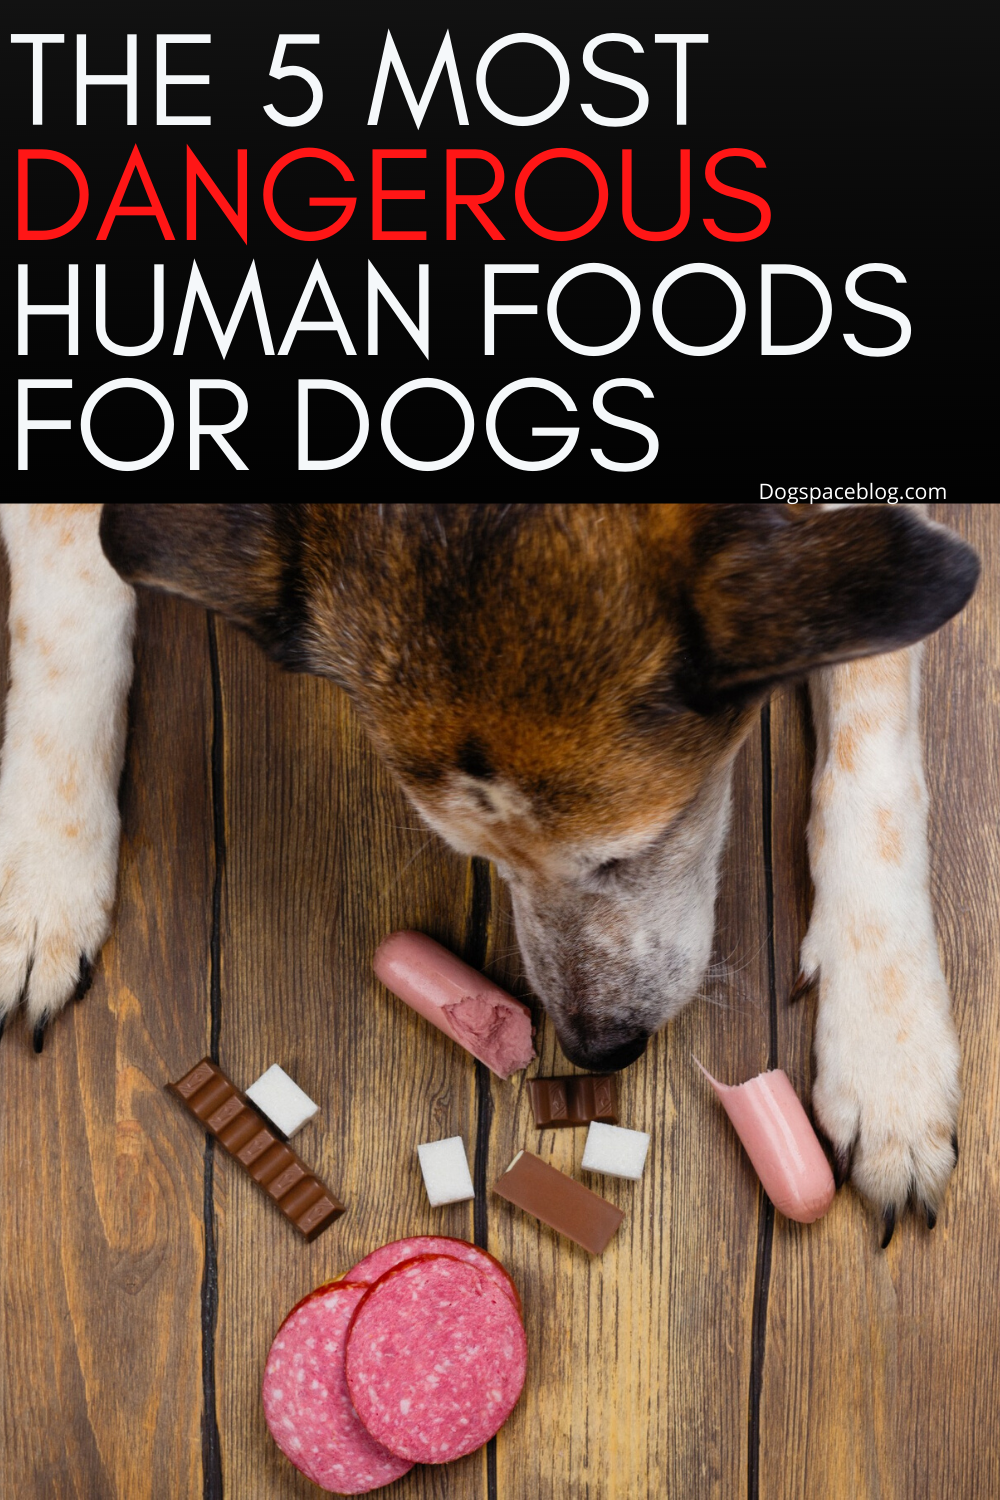 The 5 Most Dangerous Human Foods for Dogs